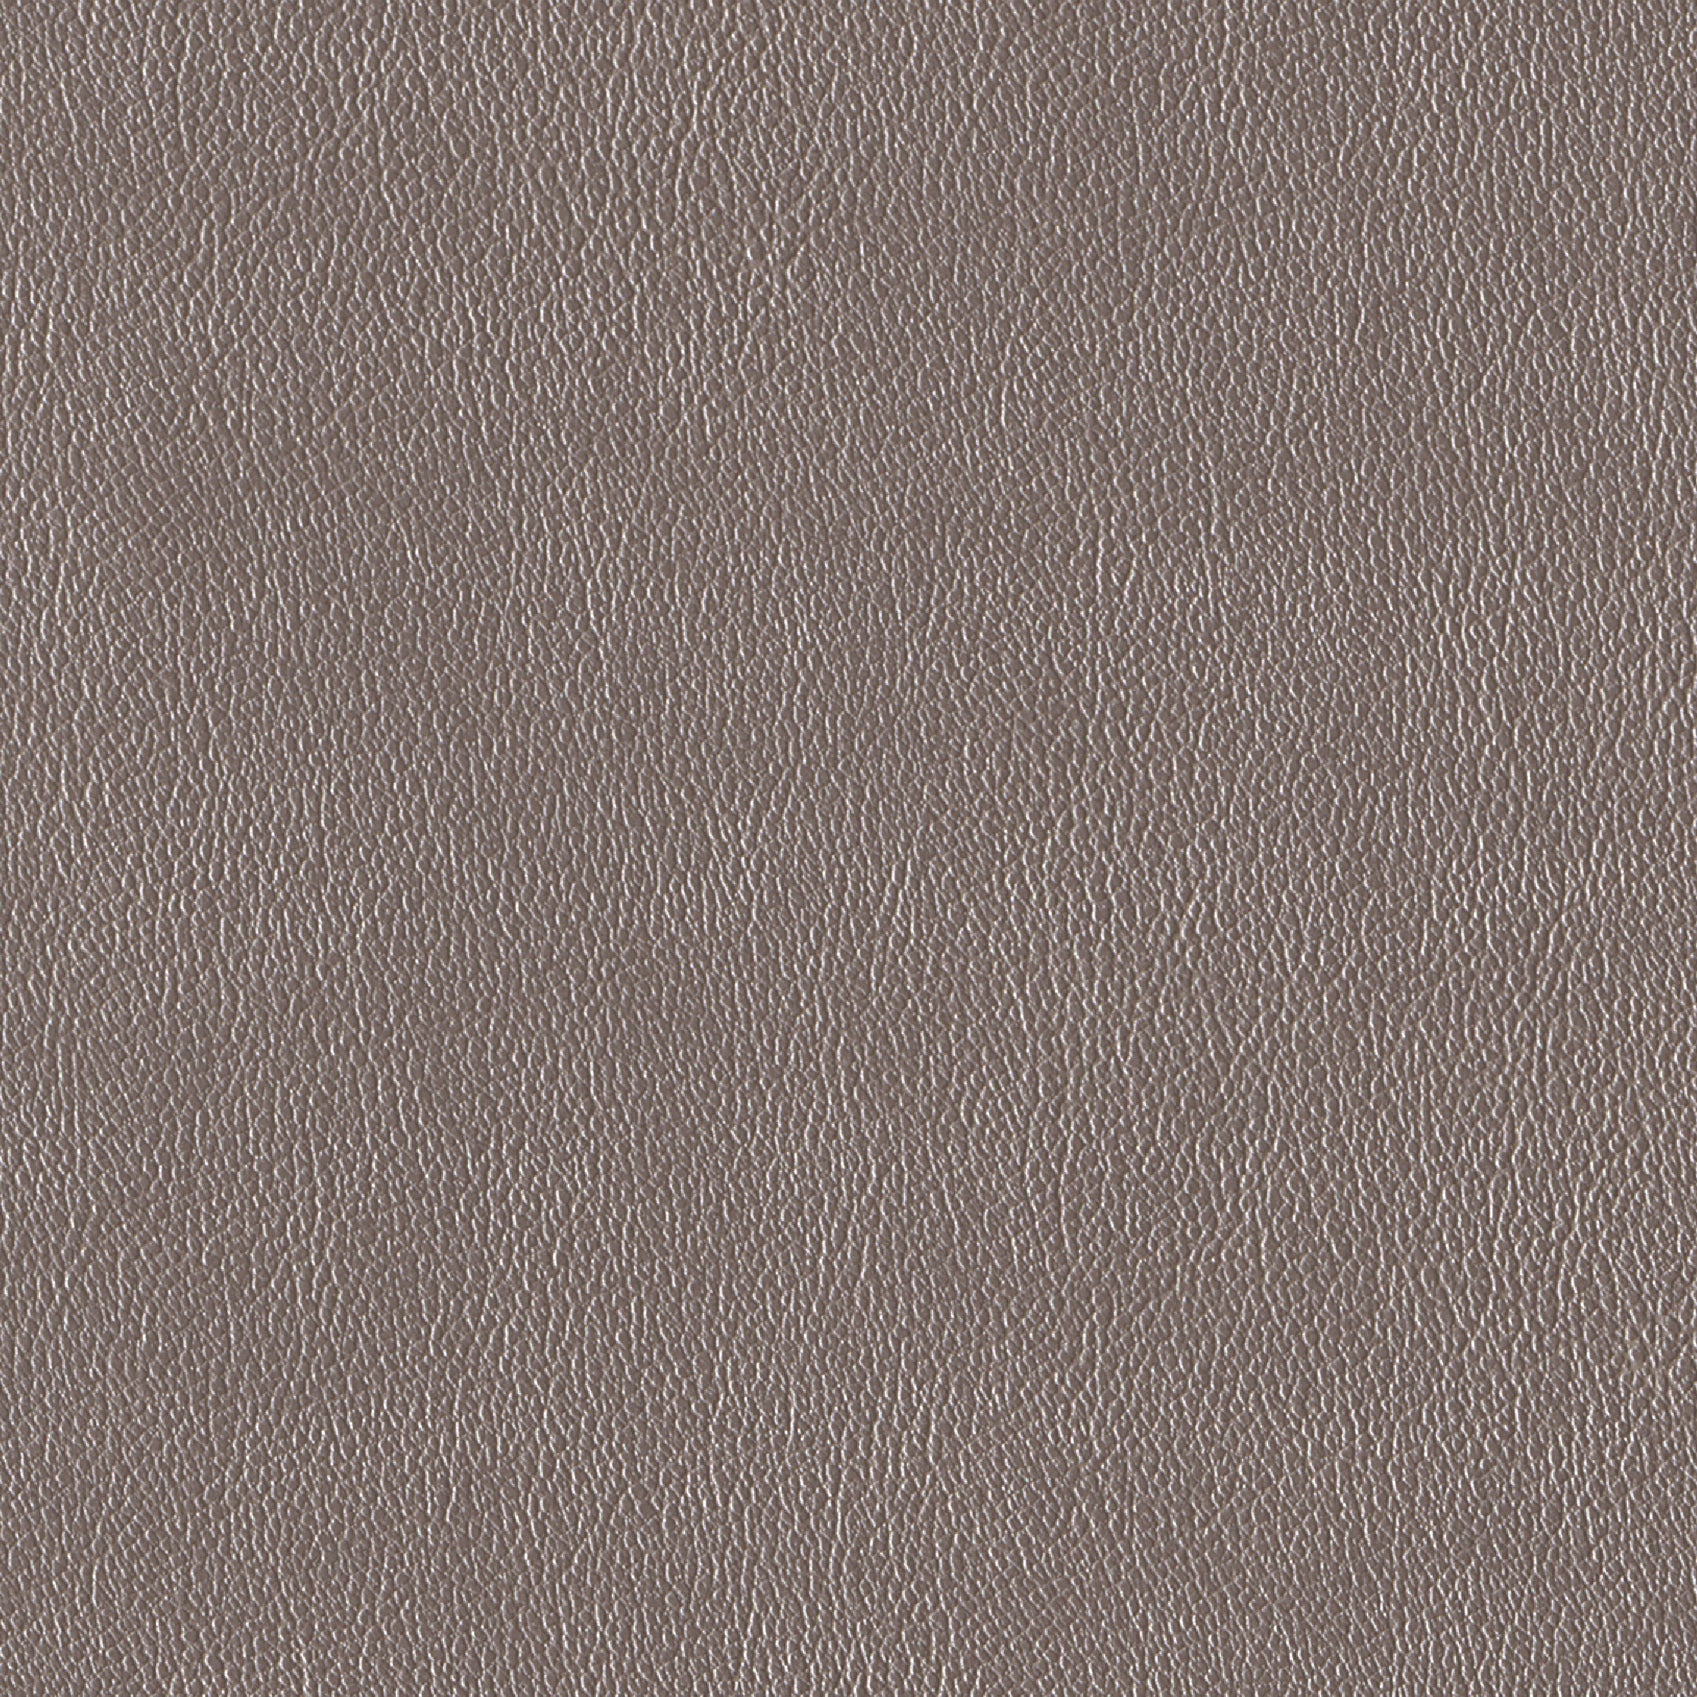 Andriali-Contract-Vinyl_Upholstery-Design-WesternFR5-Color-150Platinum-Width-140cm